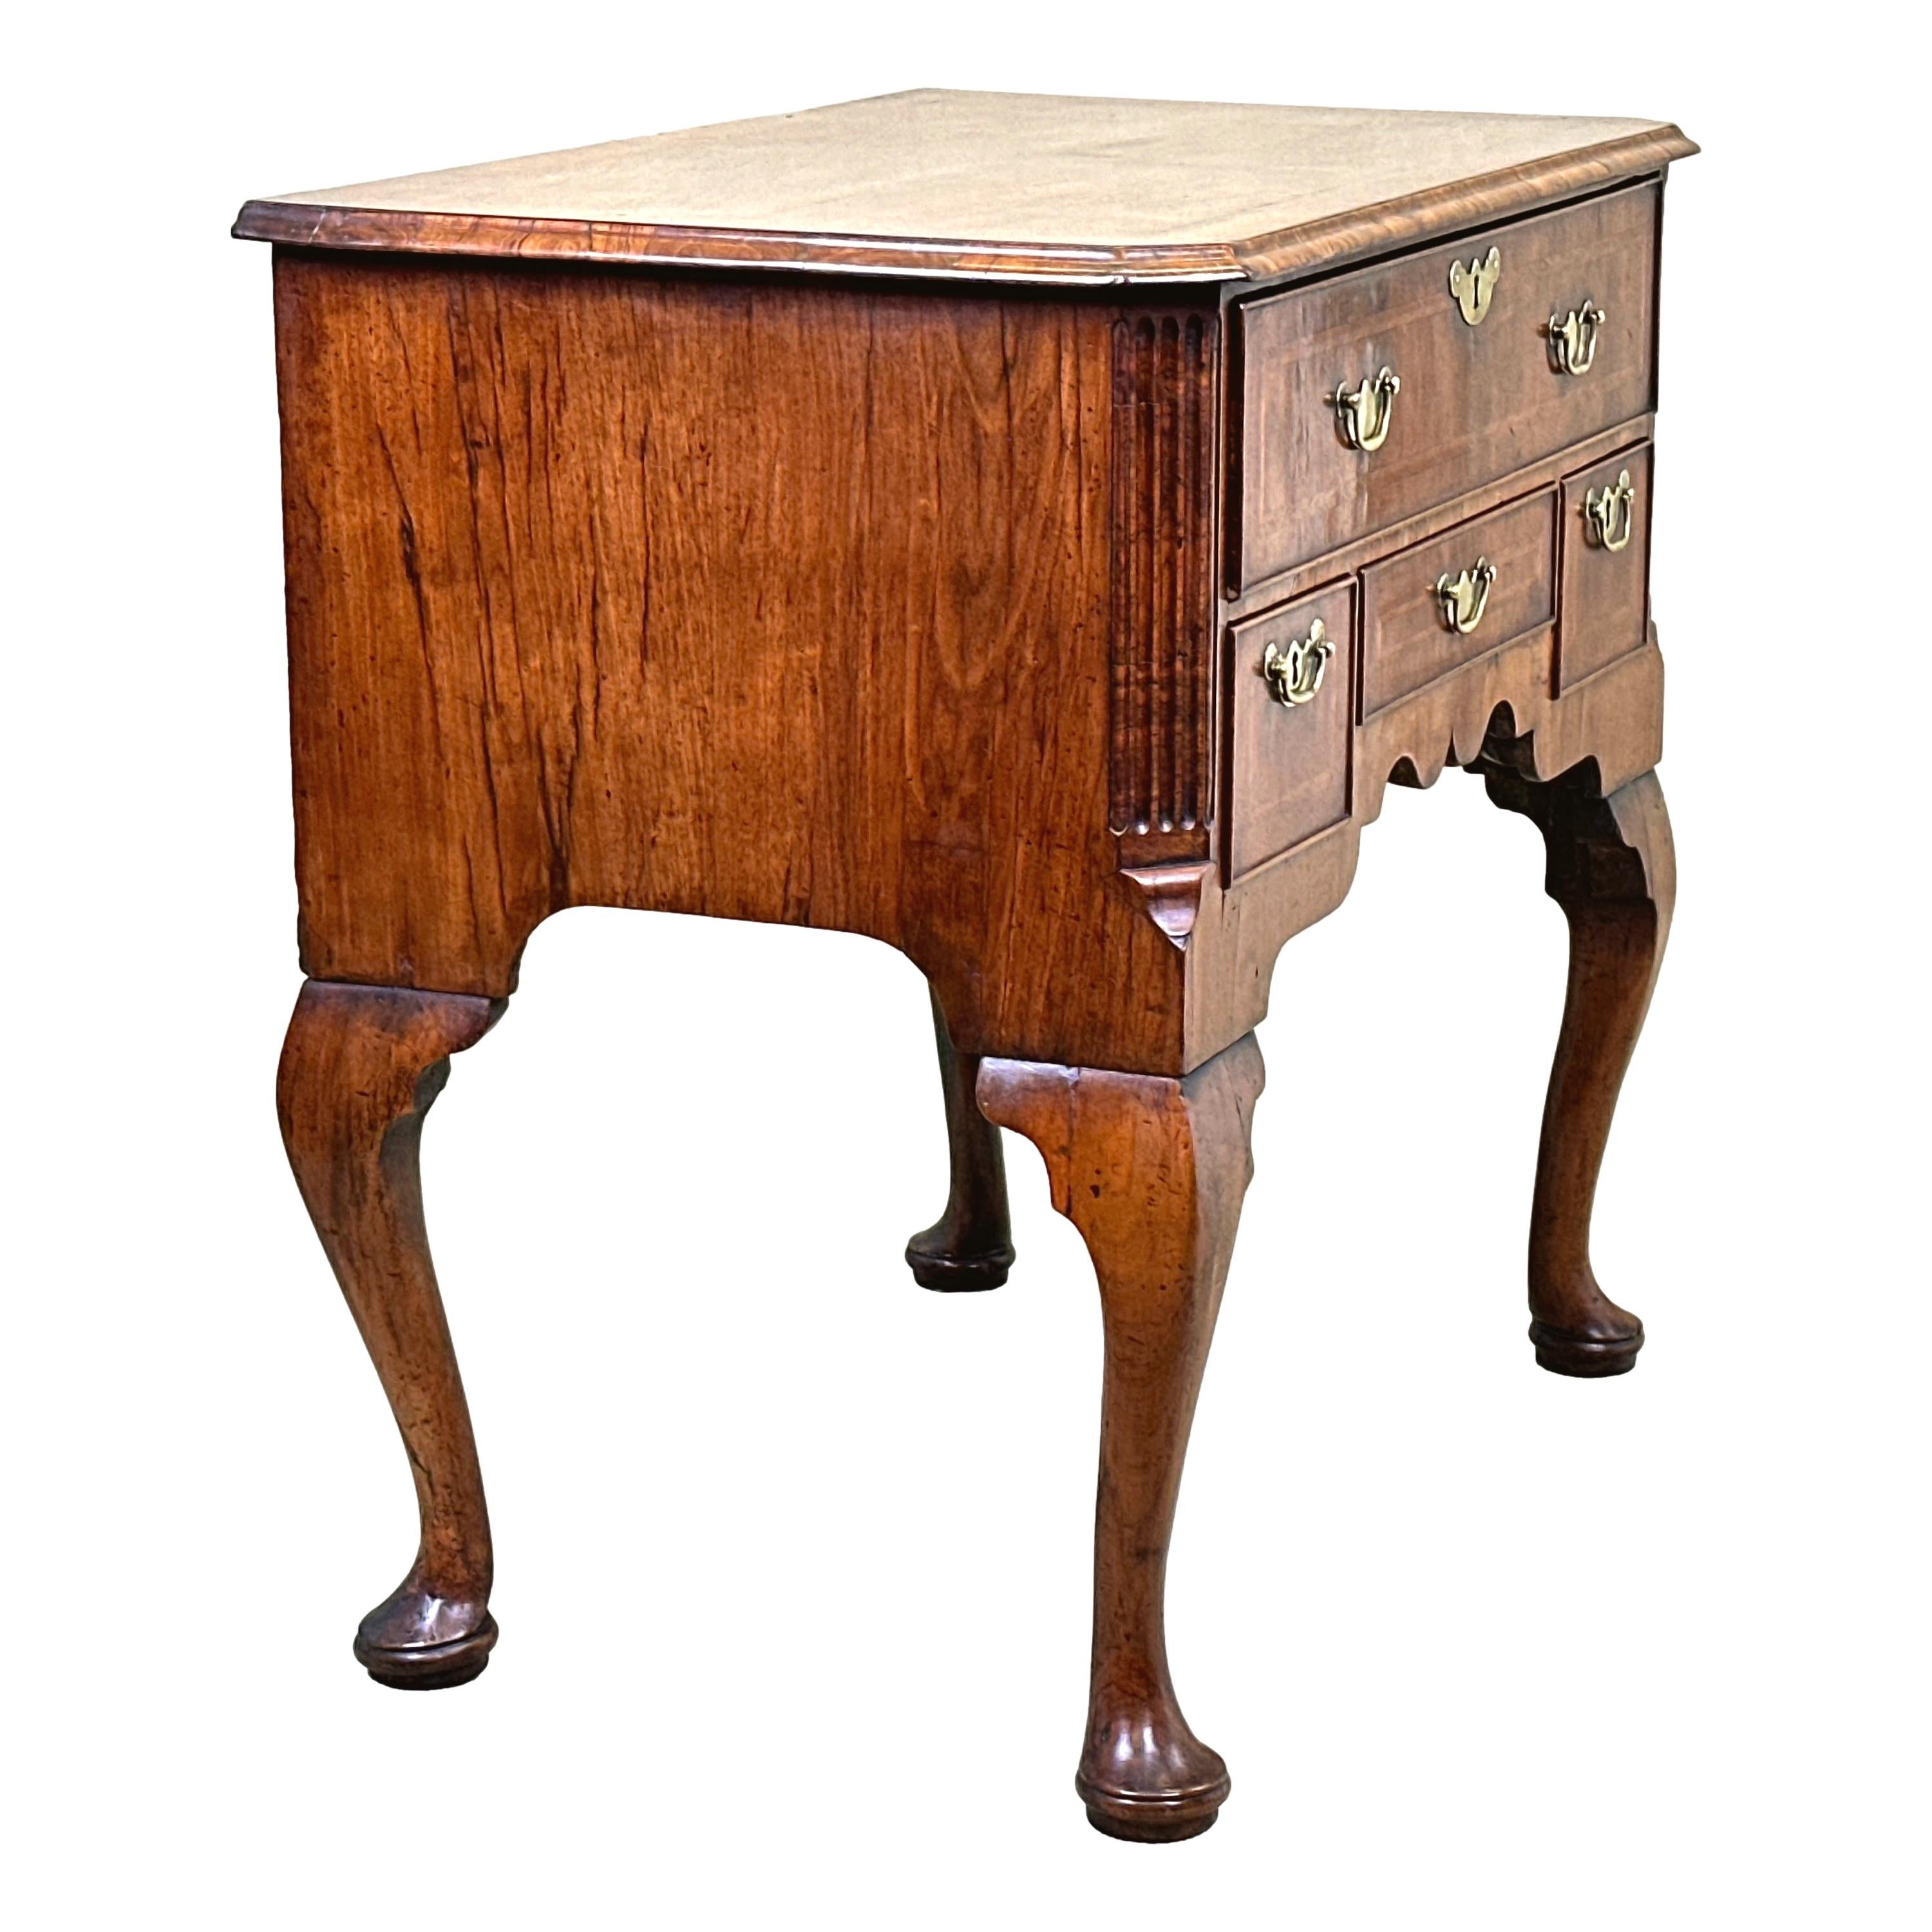 A Delightful Early 18th Century George I Period Walnut Lowboy, Or Side Table, Retaining Exceptional Untouched Colour And Patina Throughout, With Well Figured Quarter Veneered And Feather Banded Top, Over One Long And Three Short Drawers, With